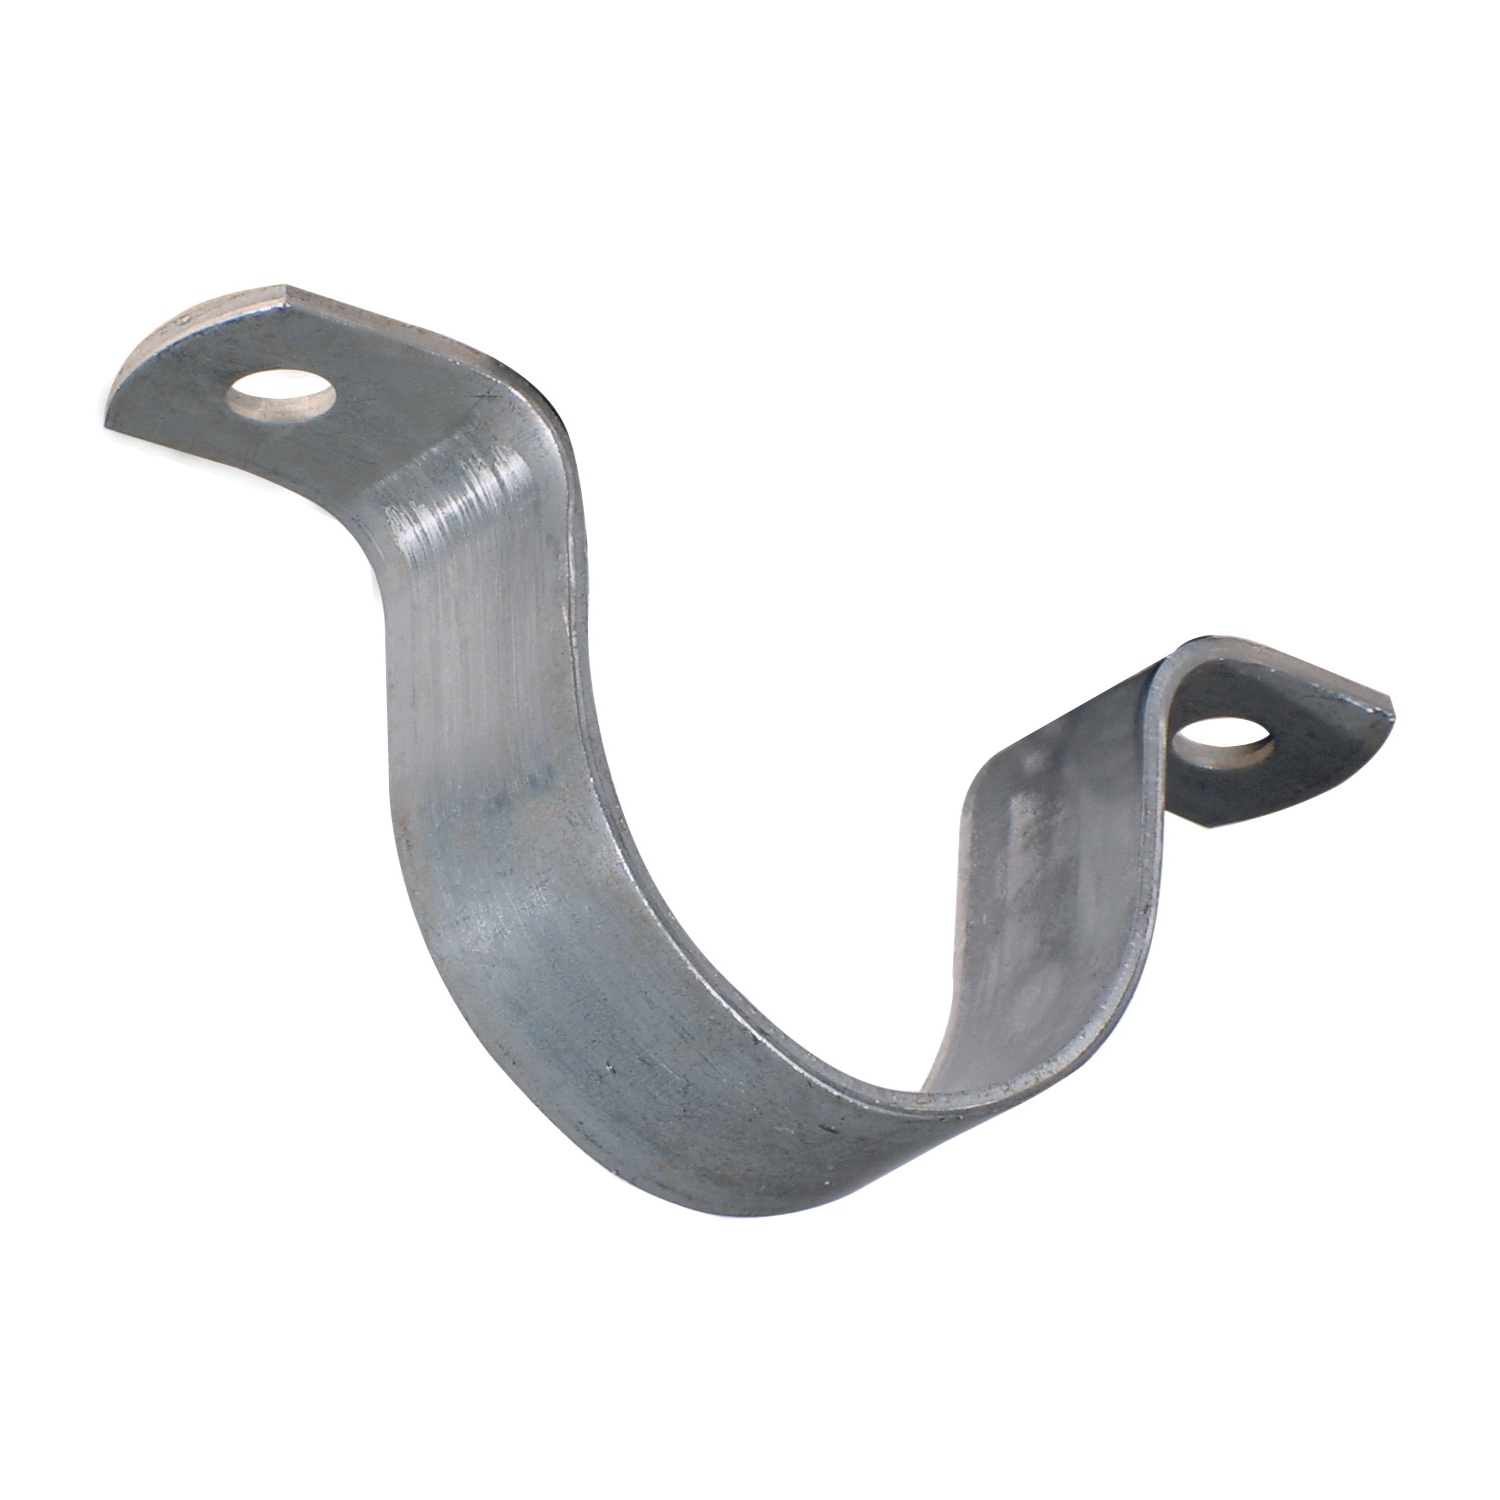 Anvil® 0500361621 FIG 262 Short Strap, 1 in Pipe, 1/8 in THK, Carbon Steel, Zinc Plated, Domestic